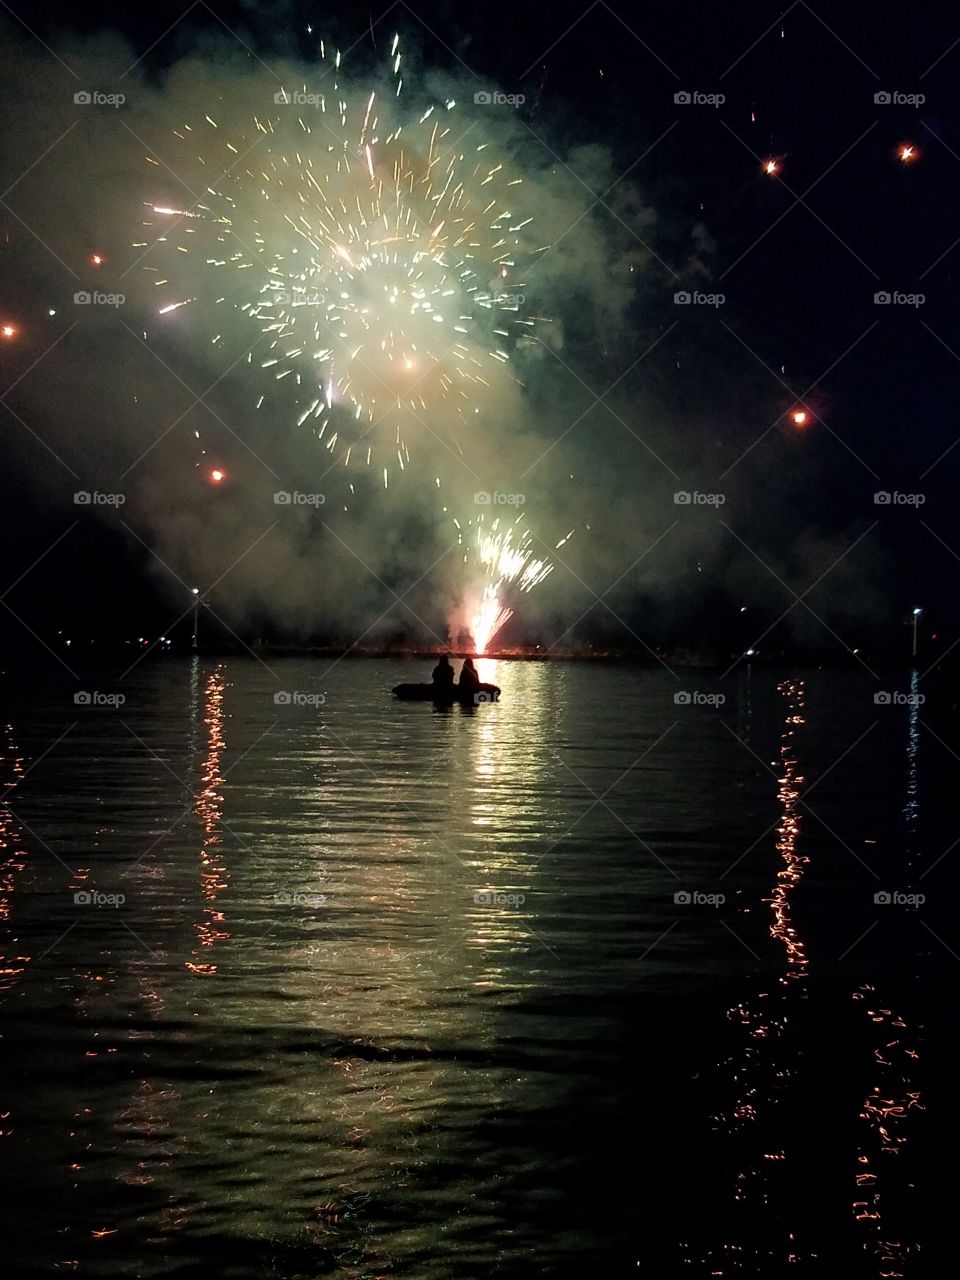 lovers watch the fireworks from a canoe on the lake